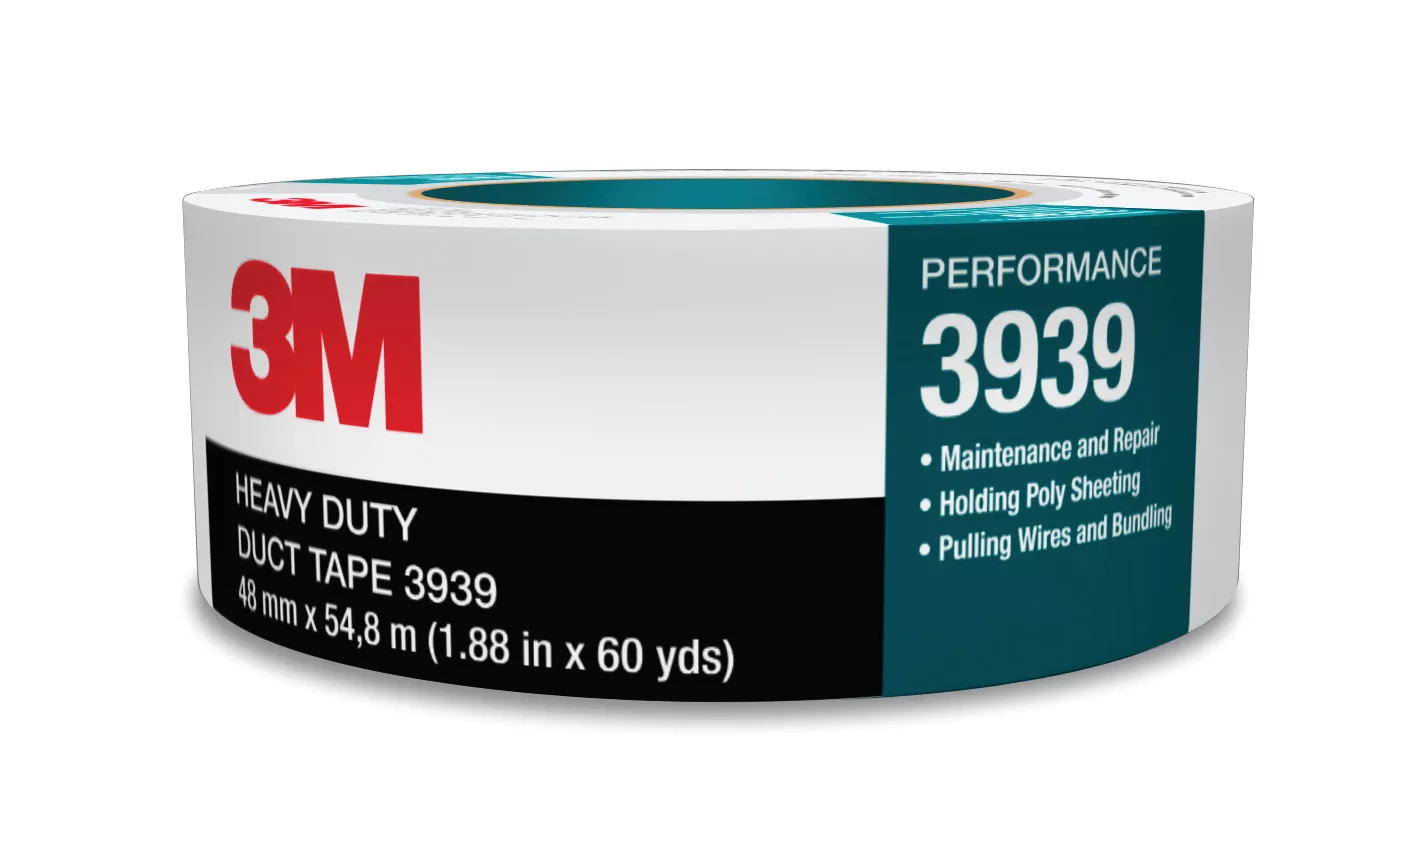 3M™ Heavy Duty Duct Tape 3939, Silver, 48 mm x 54.8 m, 9.0 mil, 24
Roll/Case, Individually Wrapped Conveniently Packaged